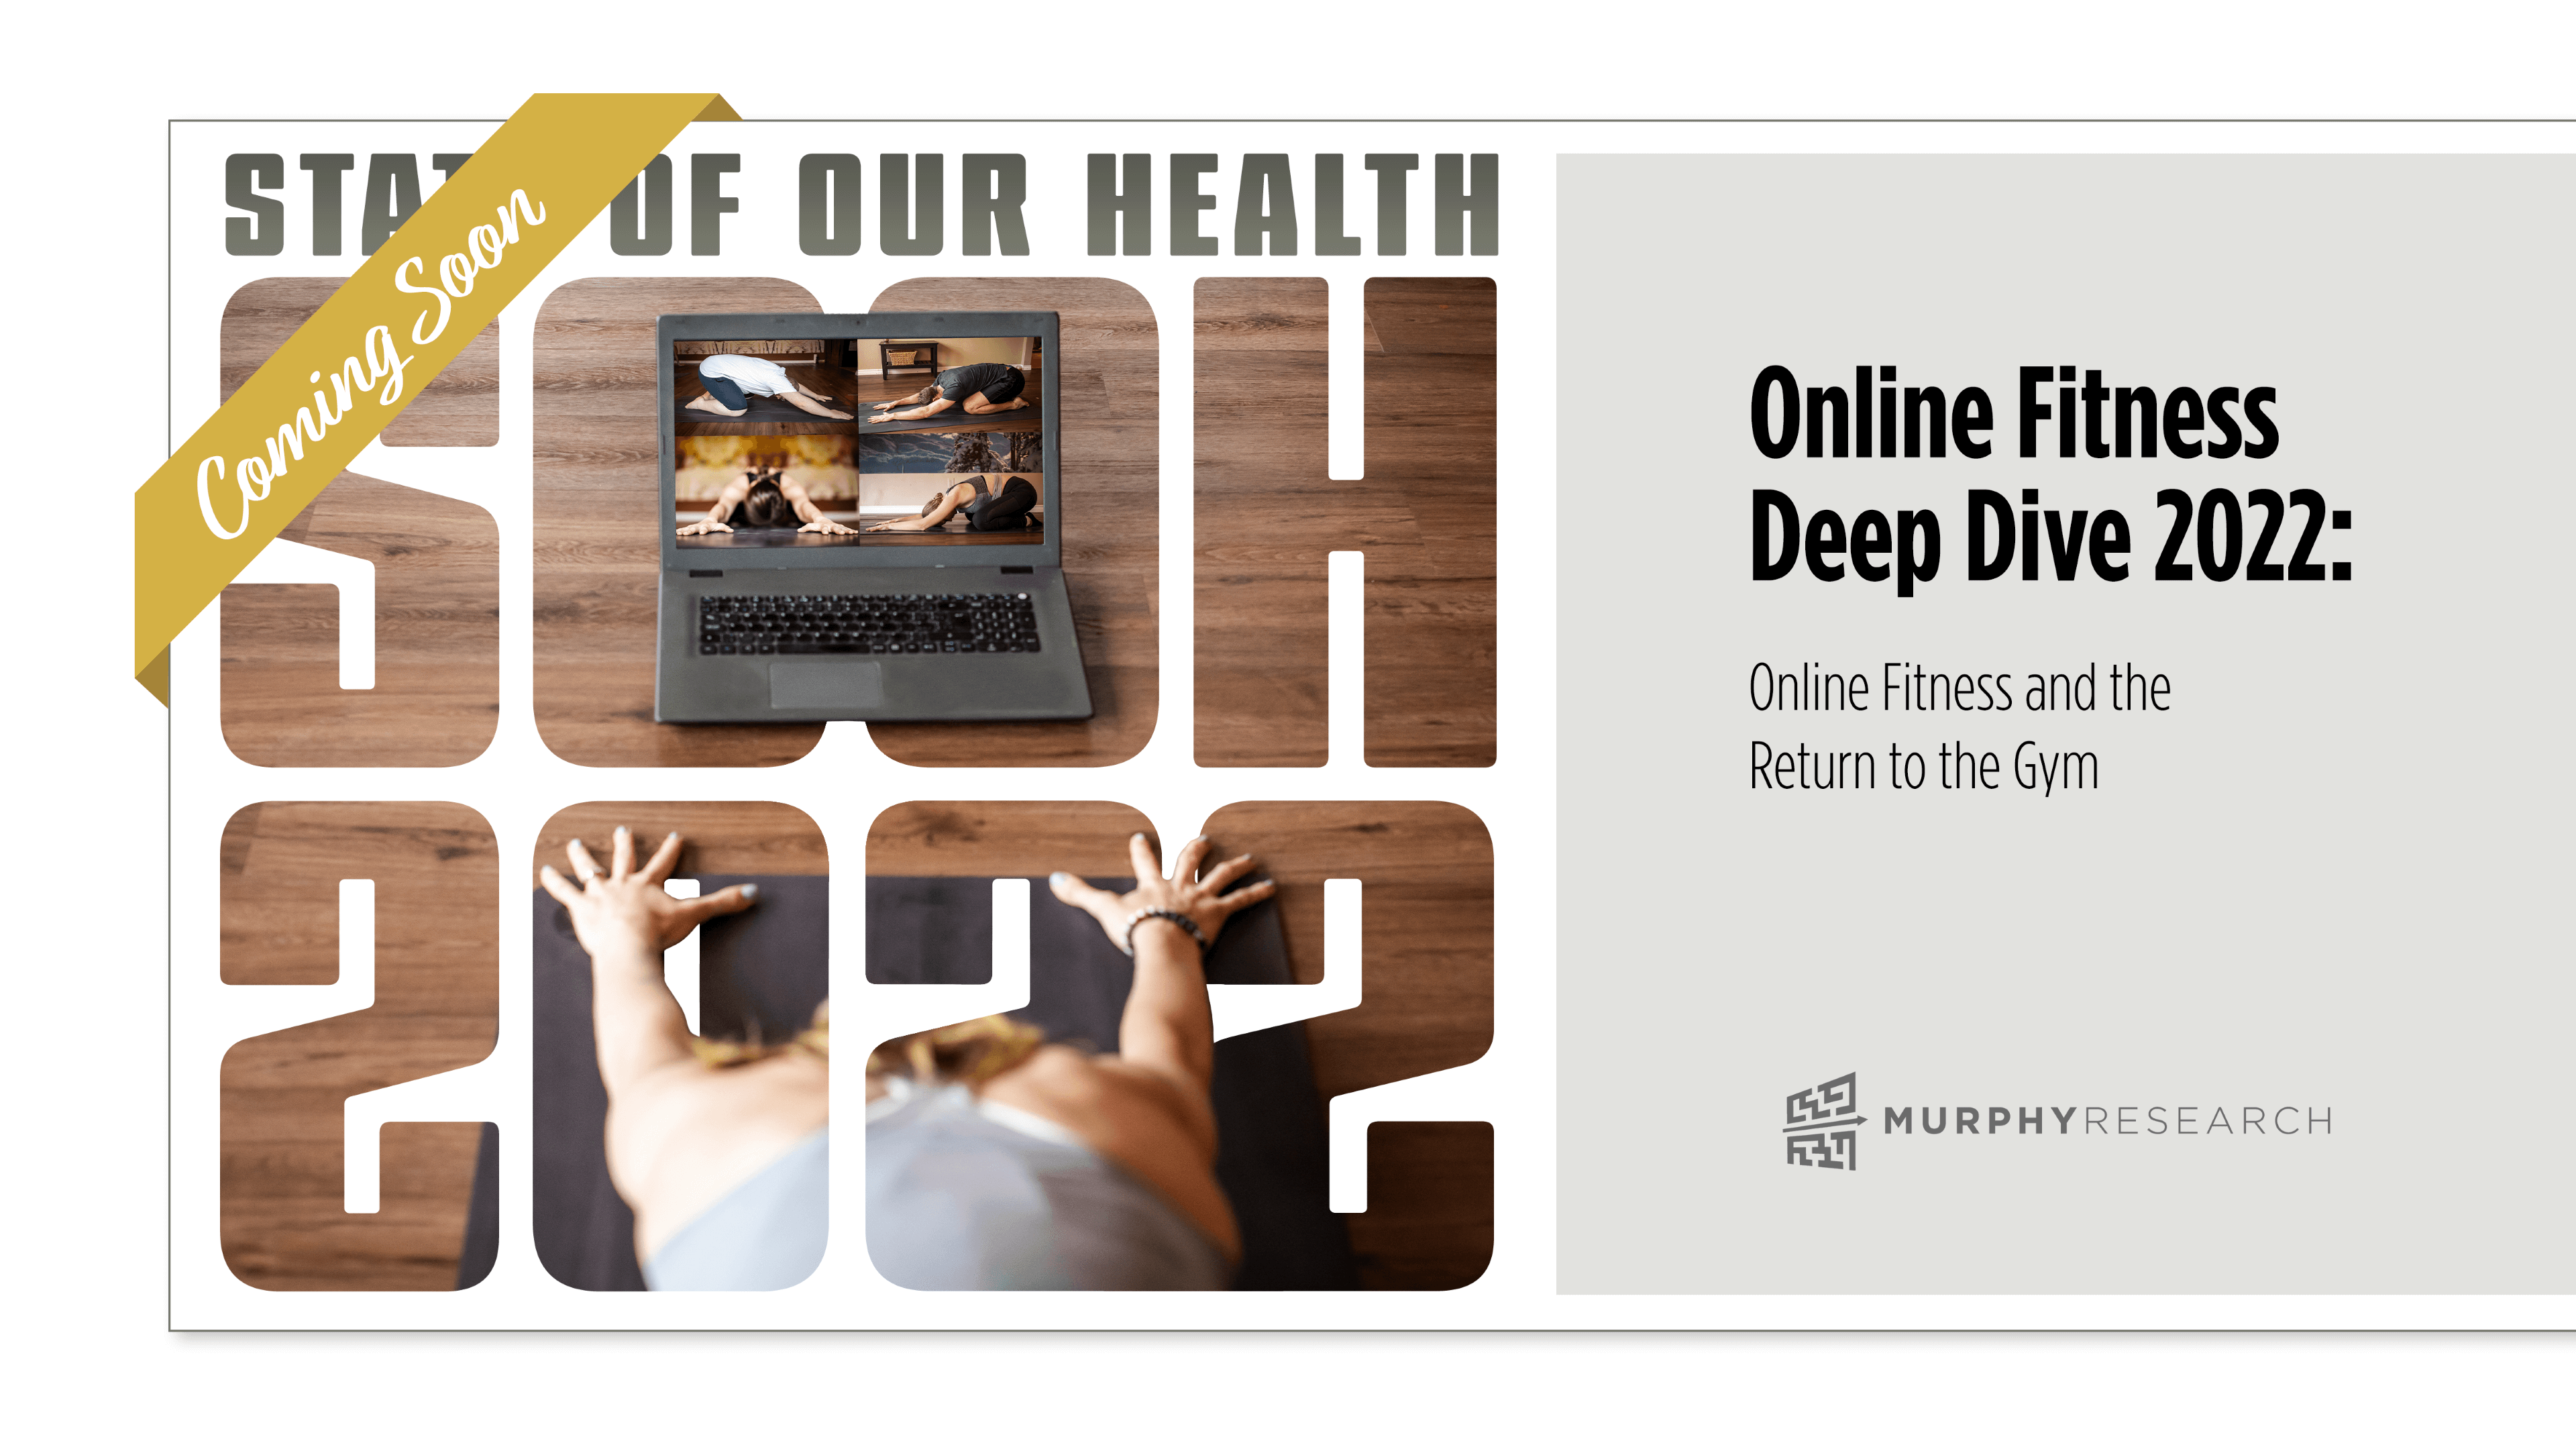 State of Our Health - Online Fitness Deep Dive 2022